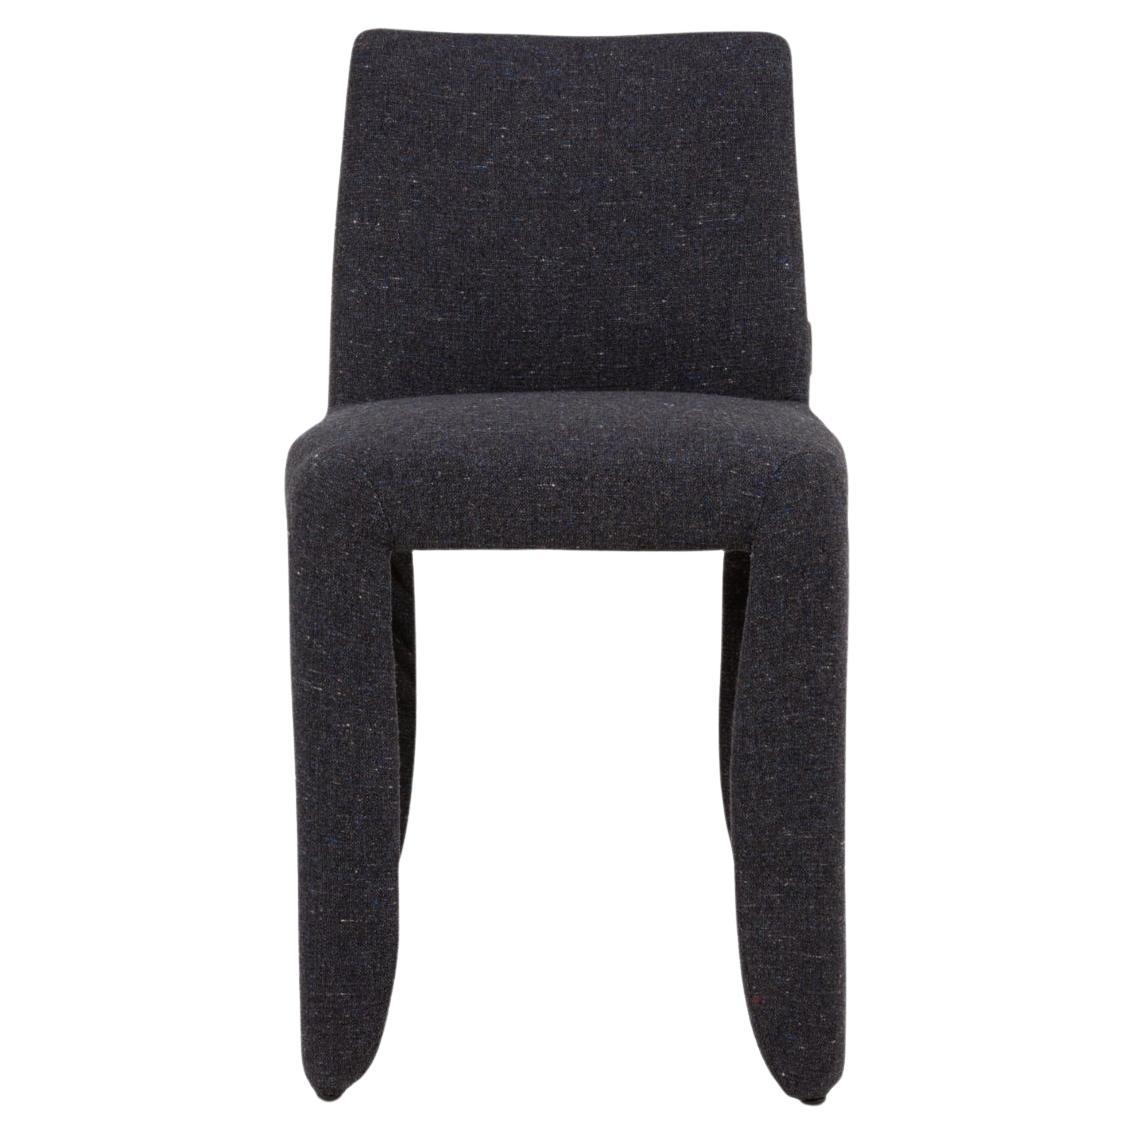 Moooi Monster Naked Chair in Solis, Dawn Dark Grey Upholstery For Sale